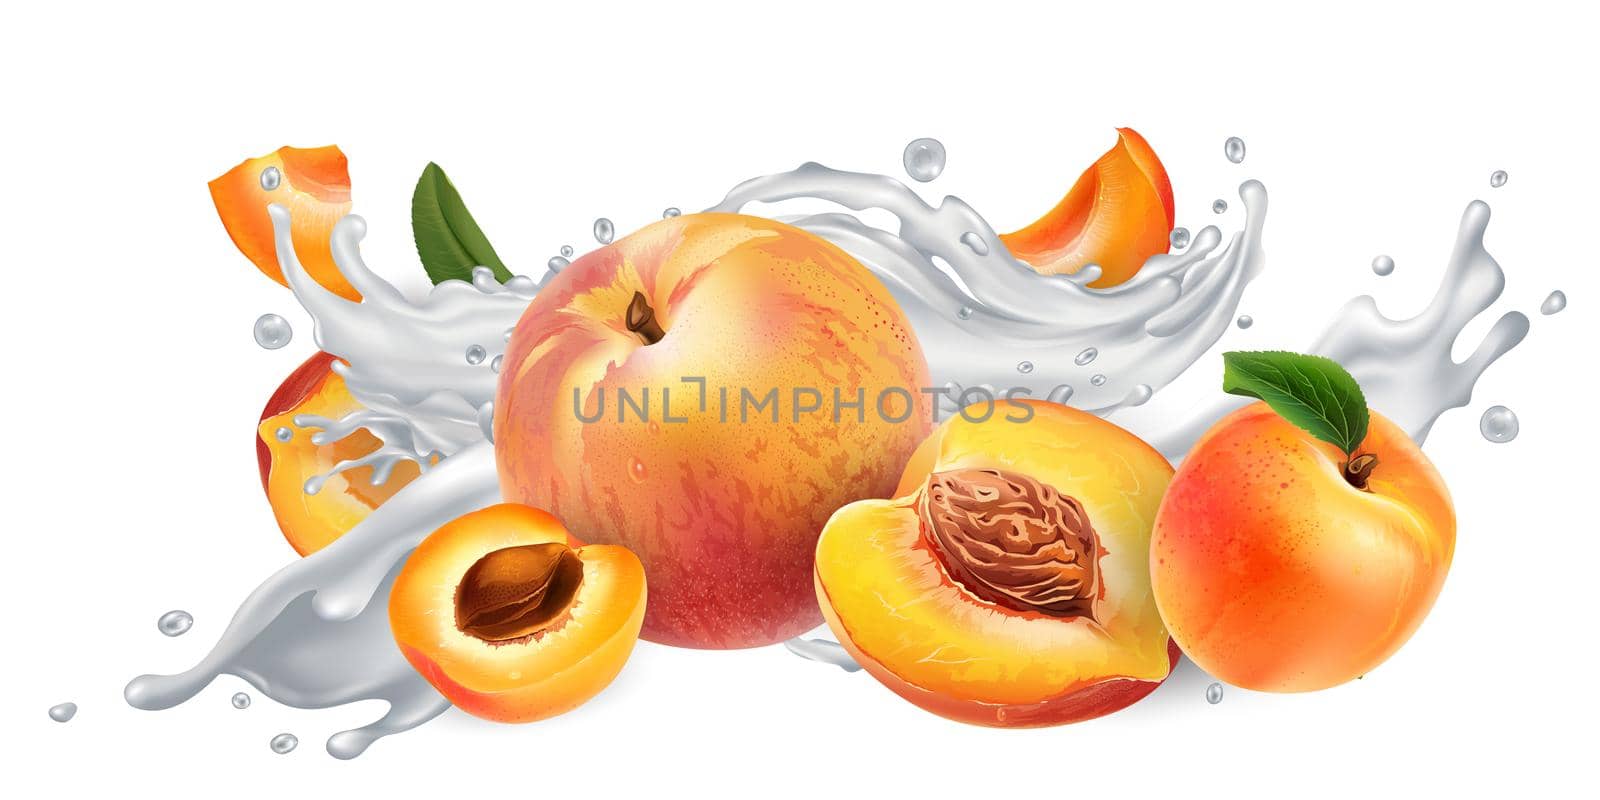 Apricots and peaches in a yogurt or milk splash. by ConceptCafe